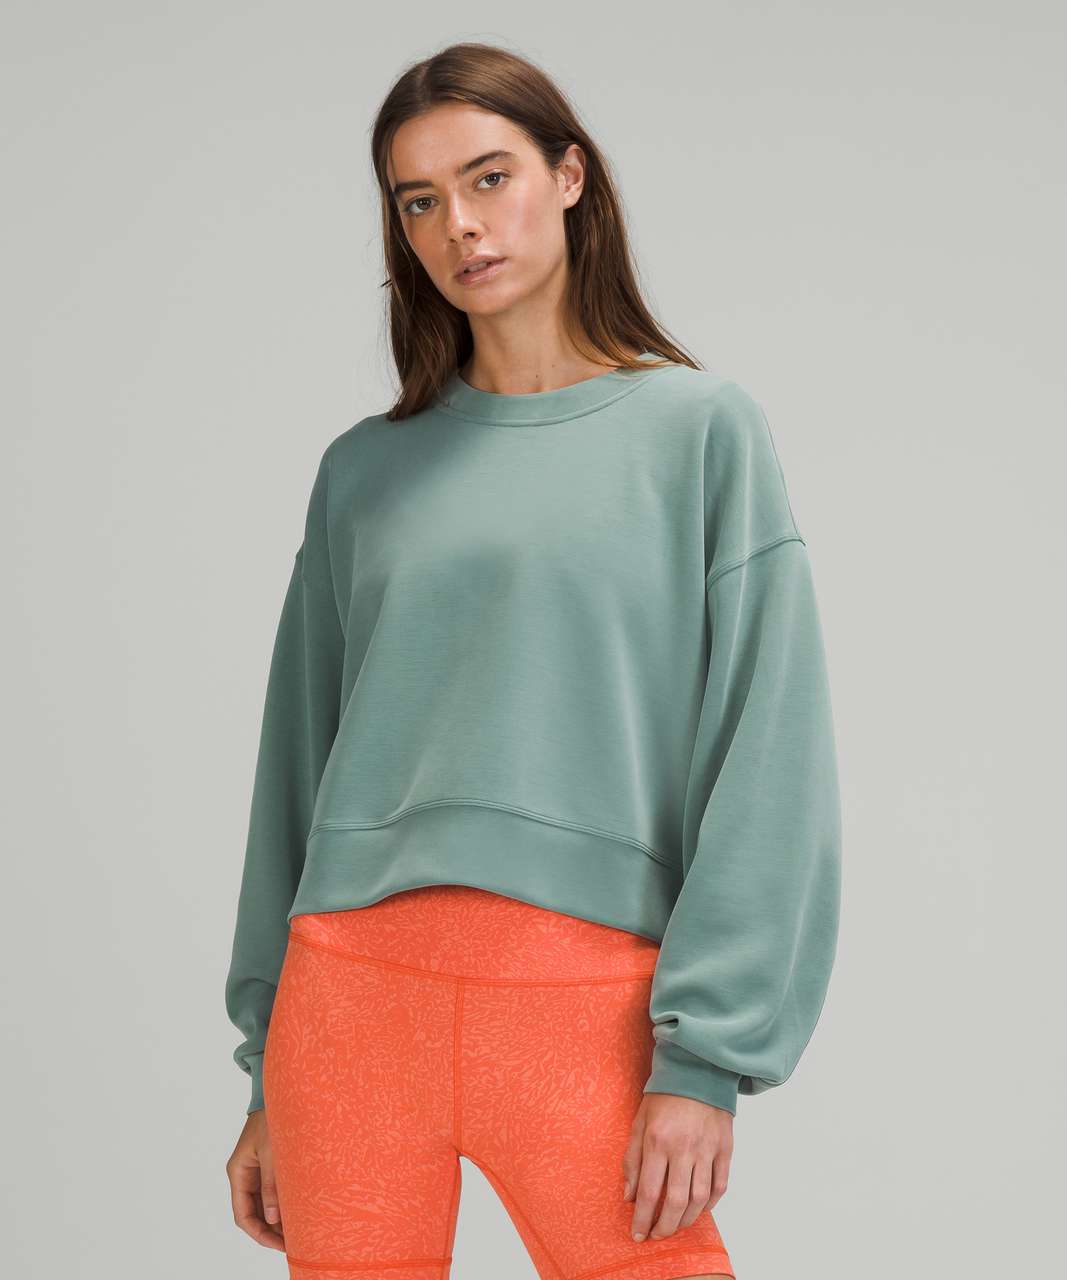 Lululemon Perfectly Oversized Cropped Crew *Softstreme™ - Tidewater Teal